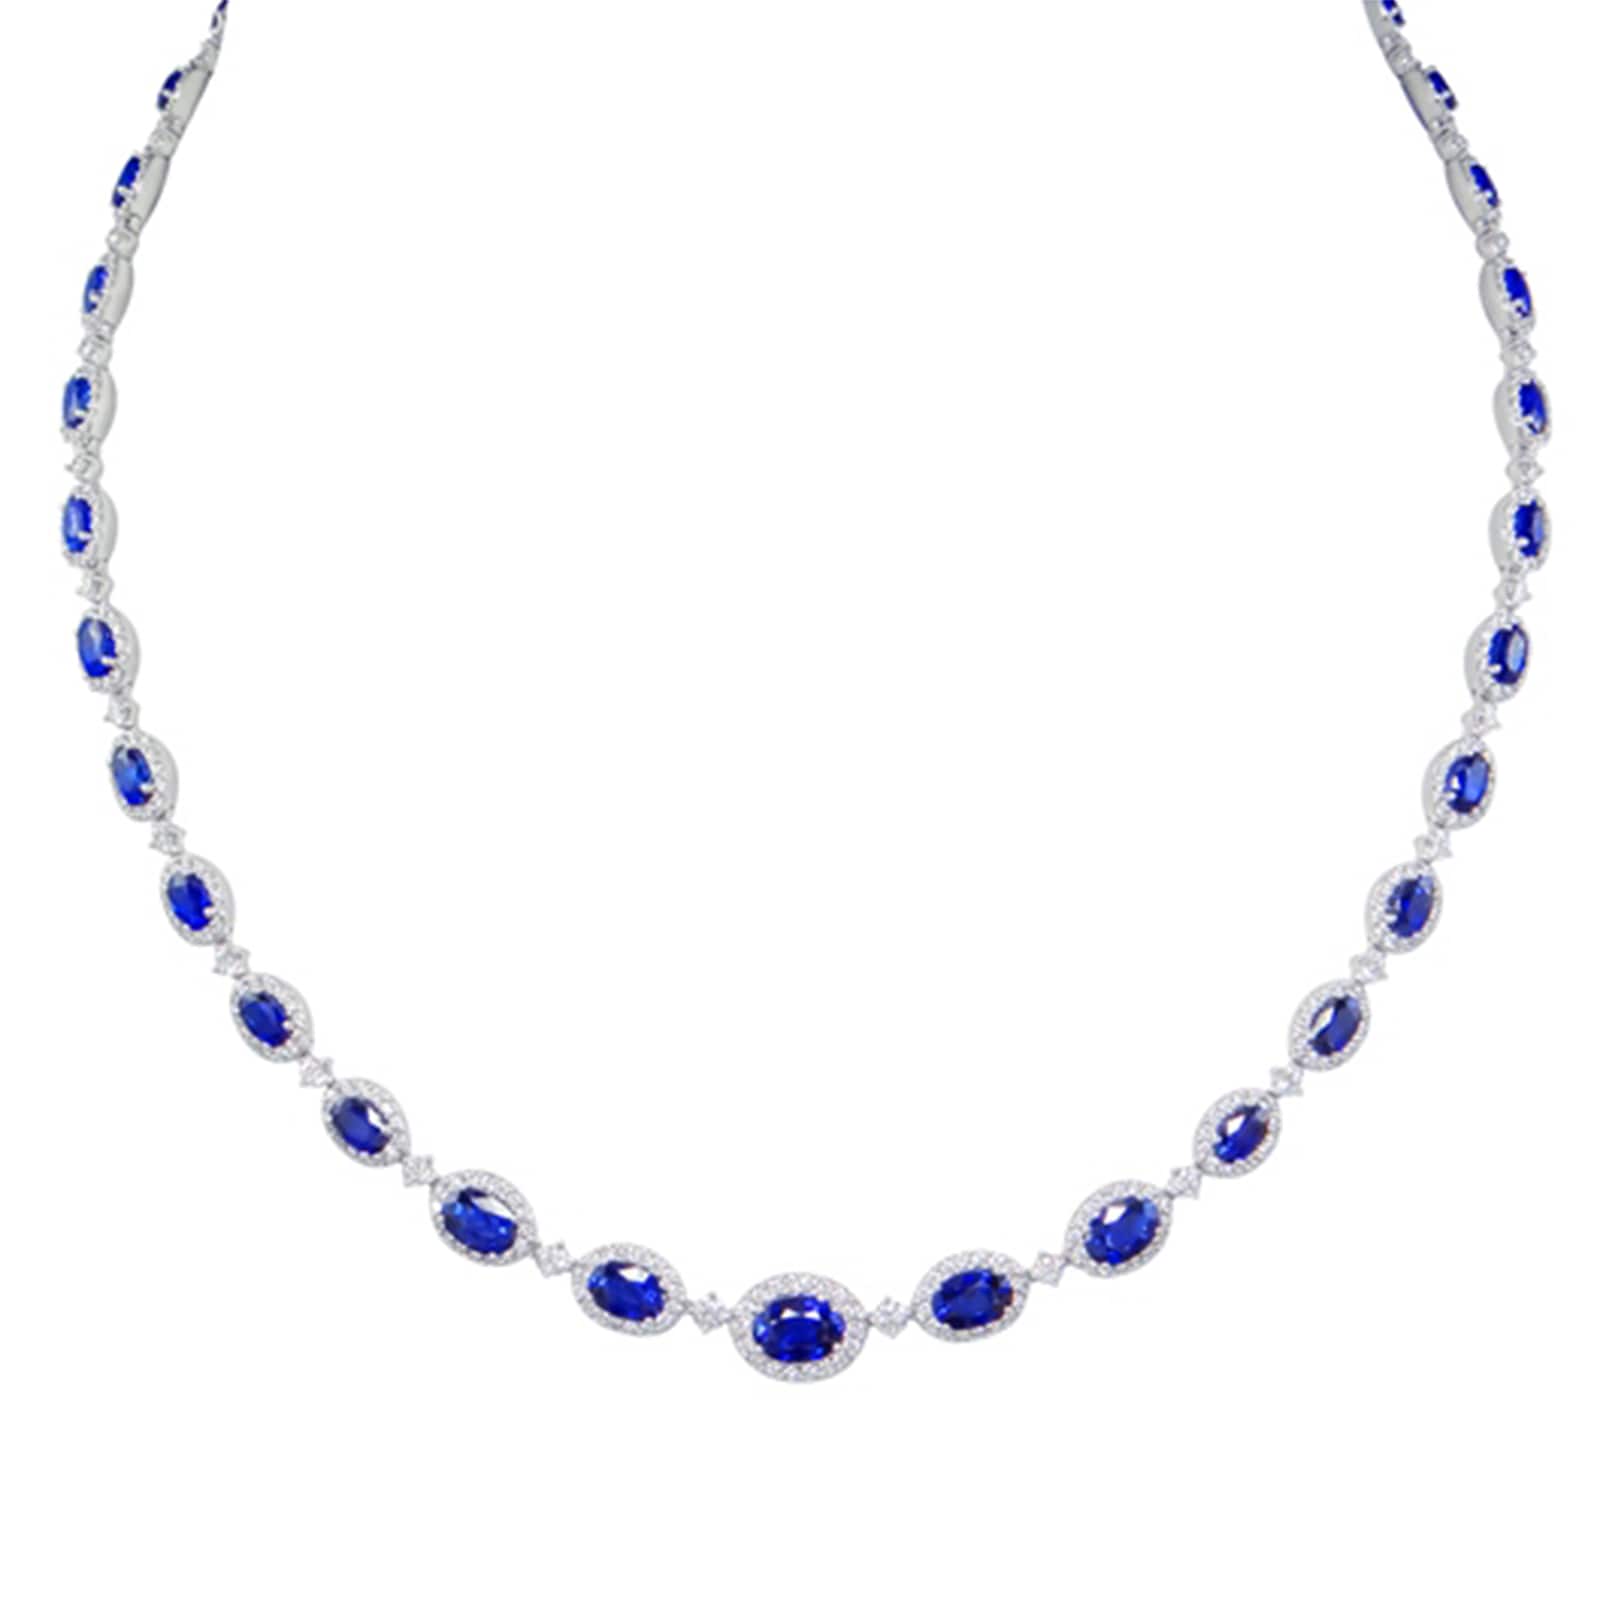 18k White Gold 14.85cttw Oval Sapphire And 4.00cttw Diamond Necklace